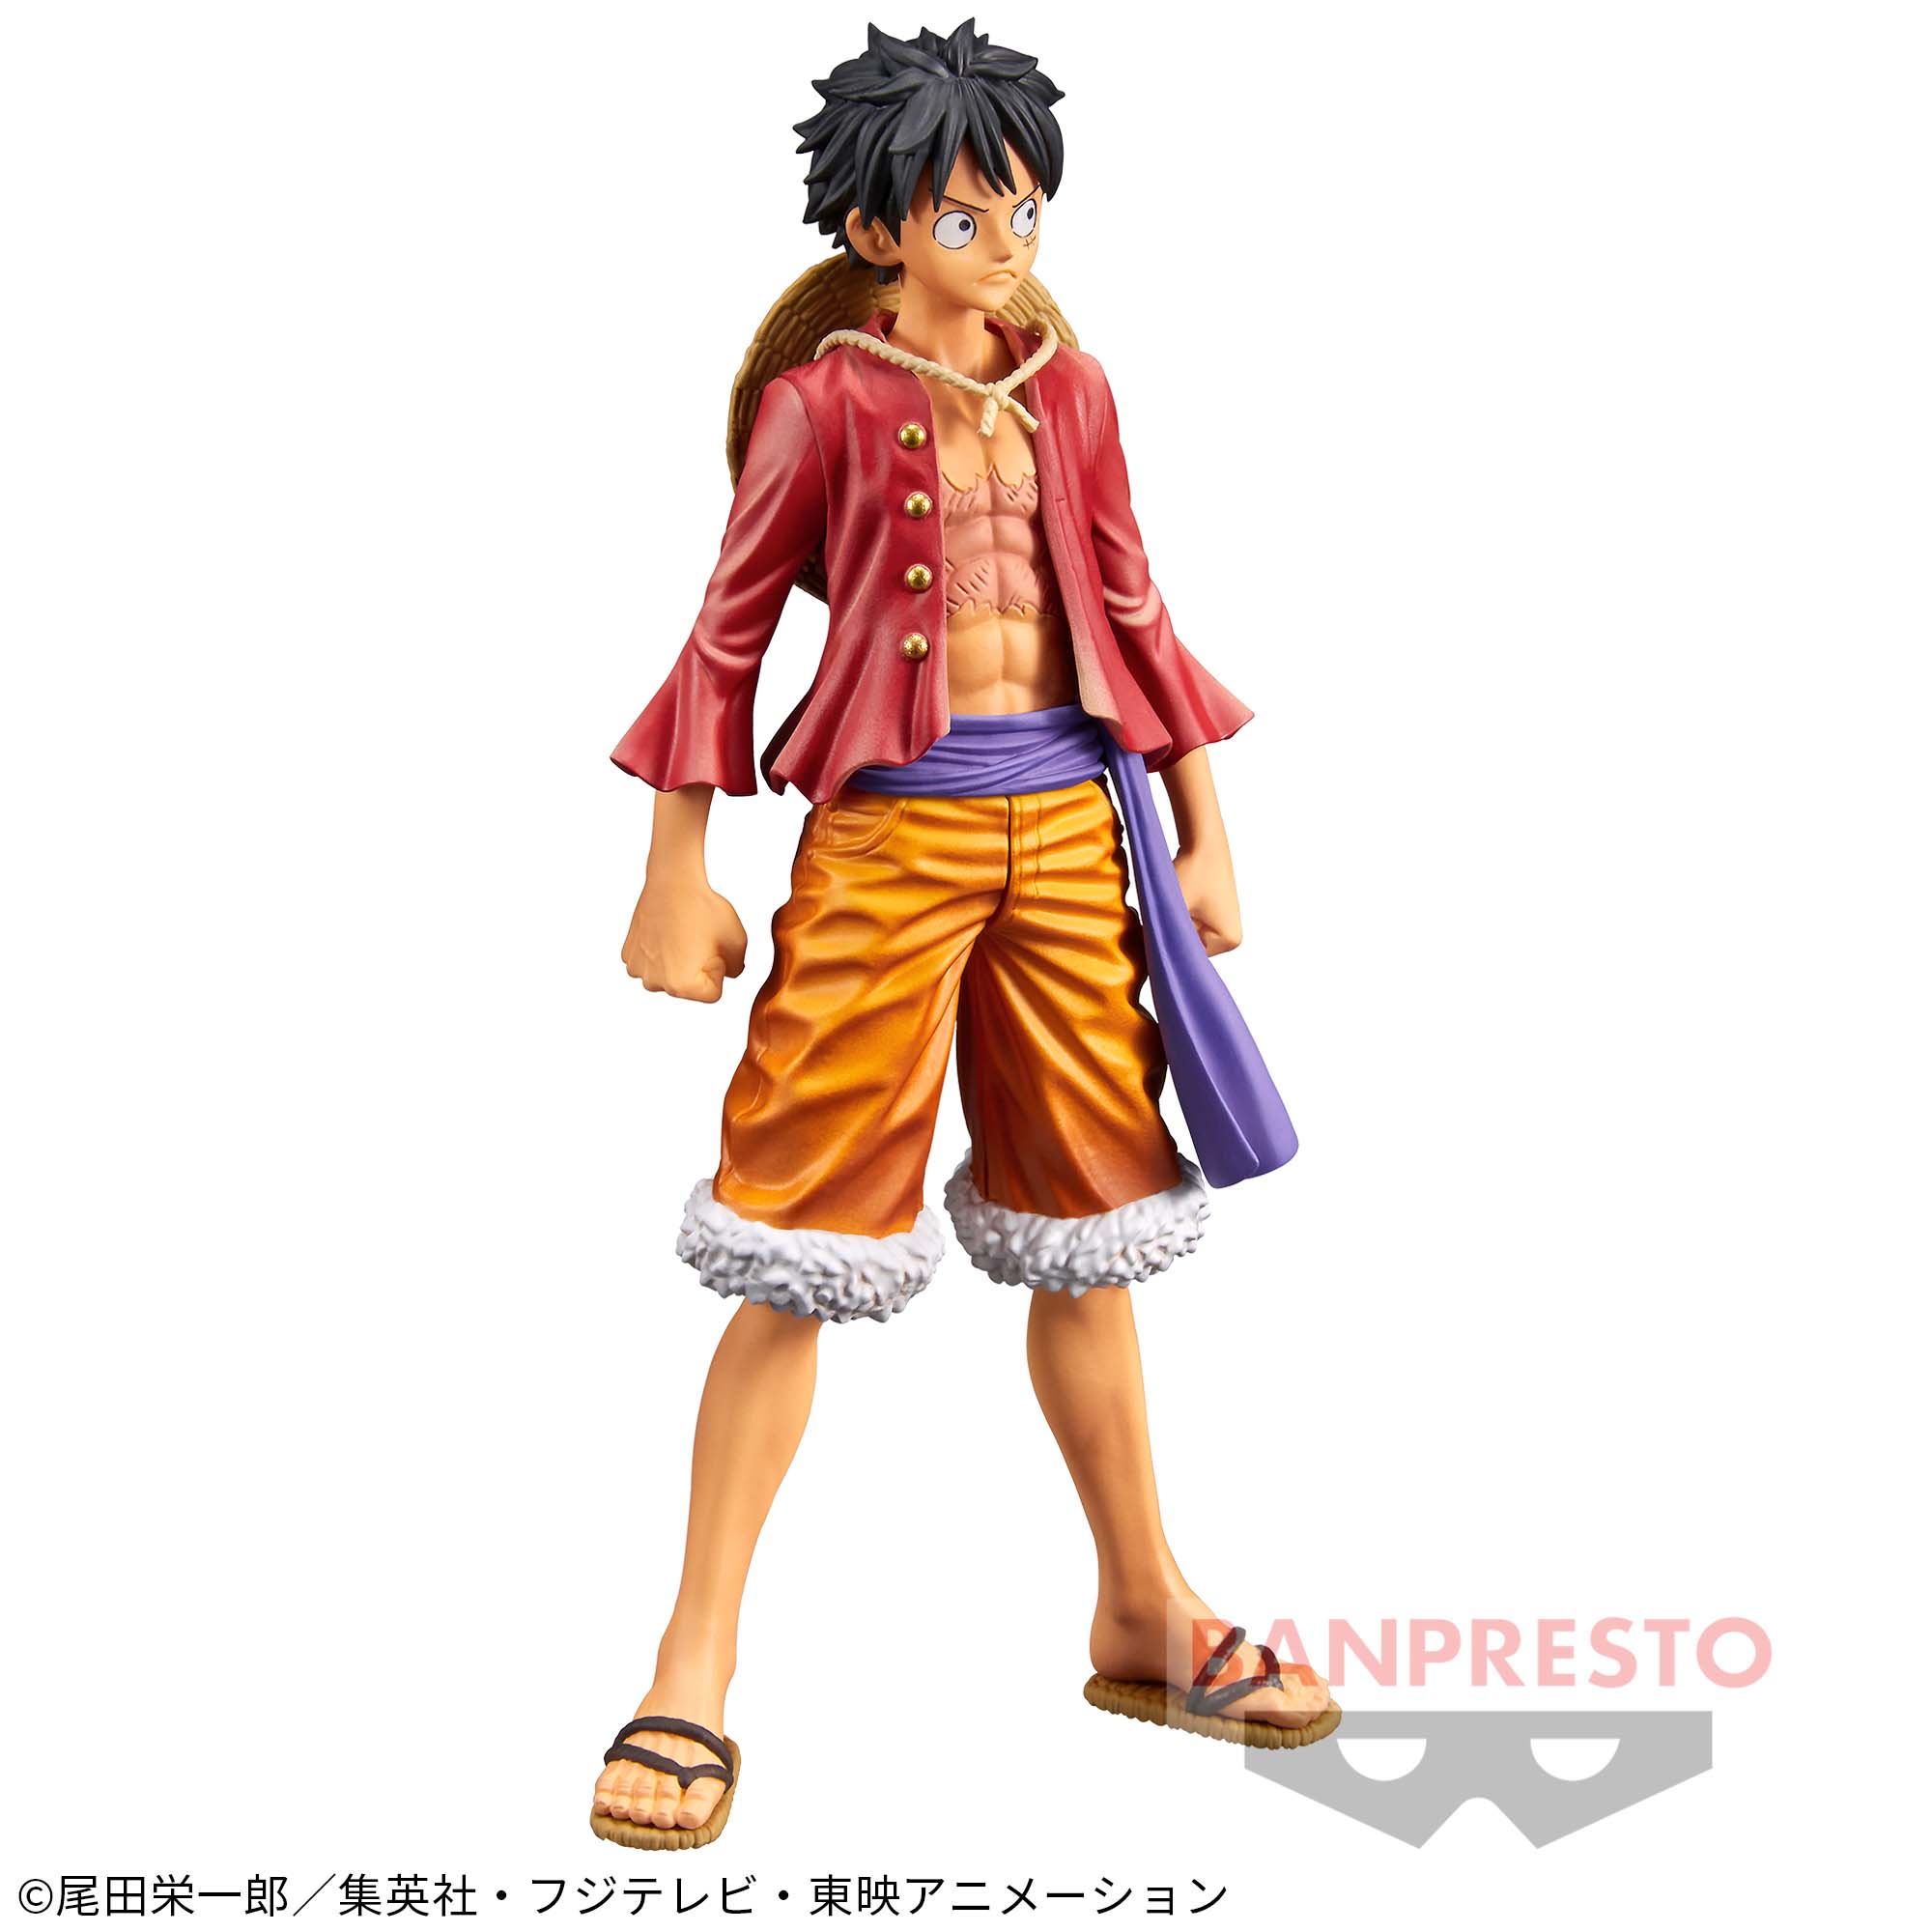 ONE PIECE DXF -THE GRANDLINE SERIES- WANO COUNTRY MONKEY D. LUFFY